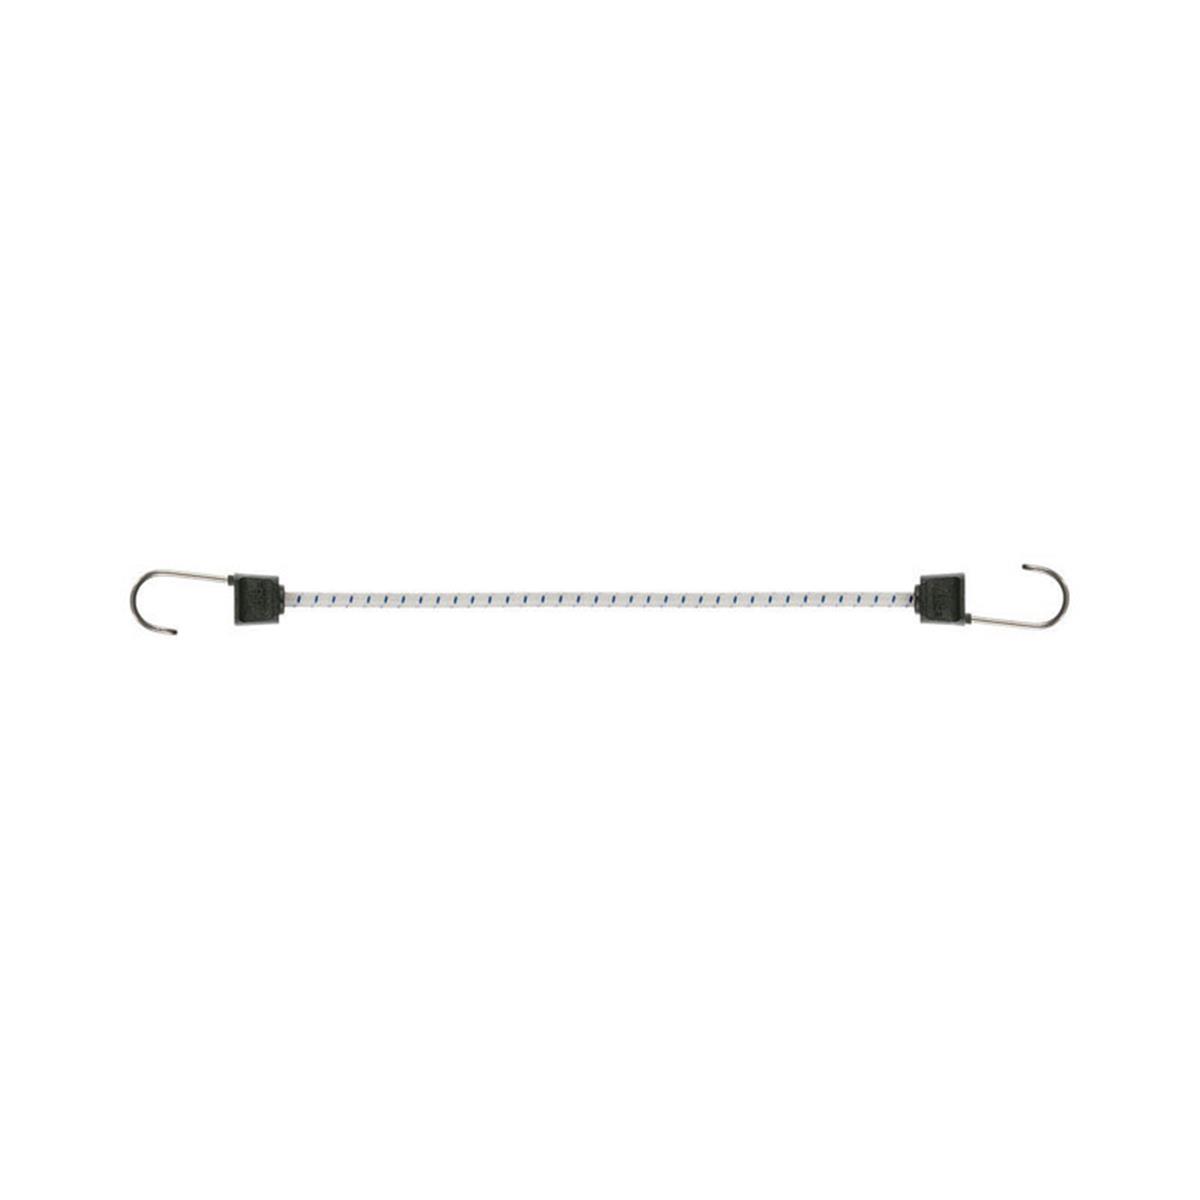 06272 18 In. Bungee Cords Marine